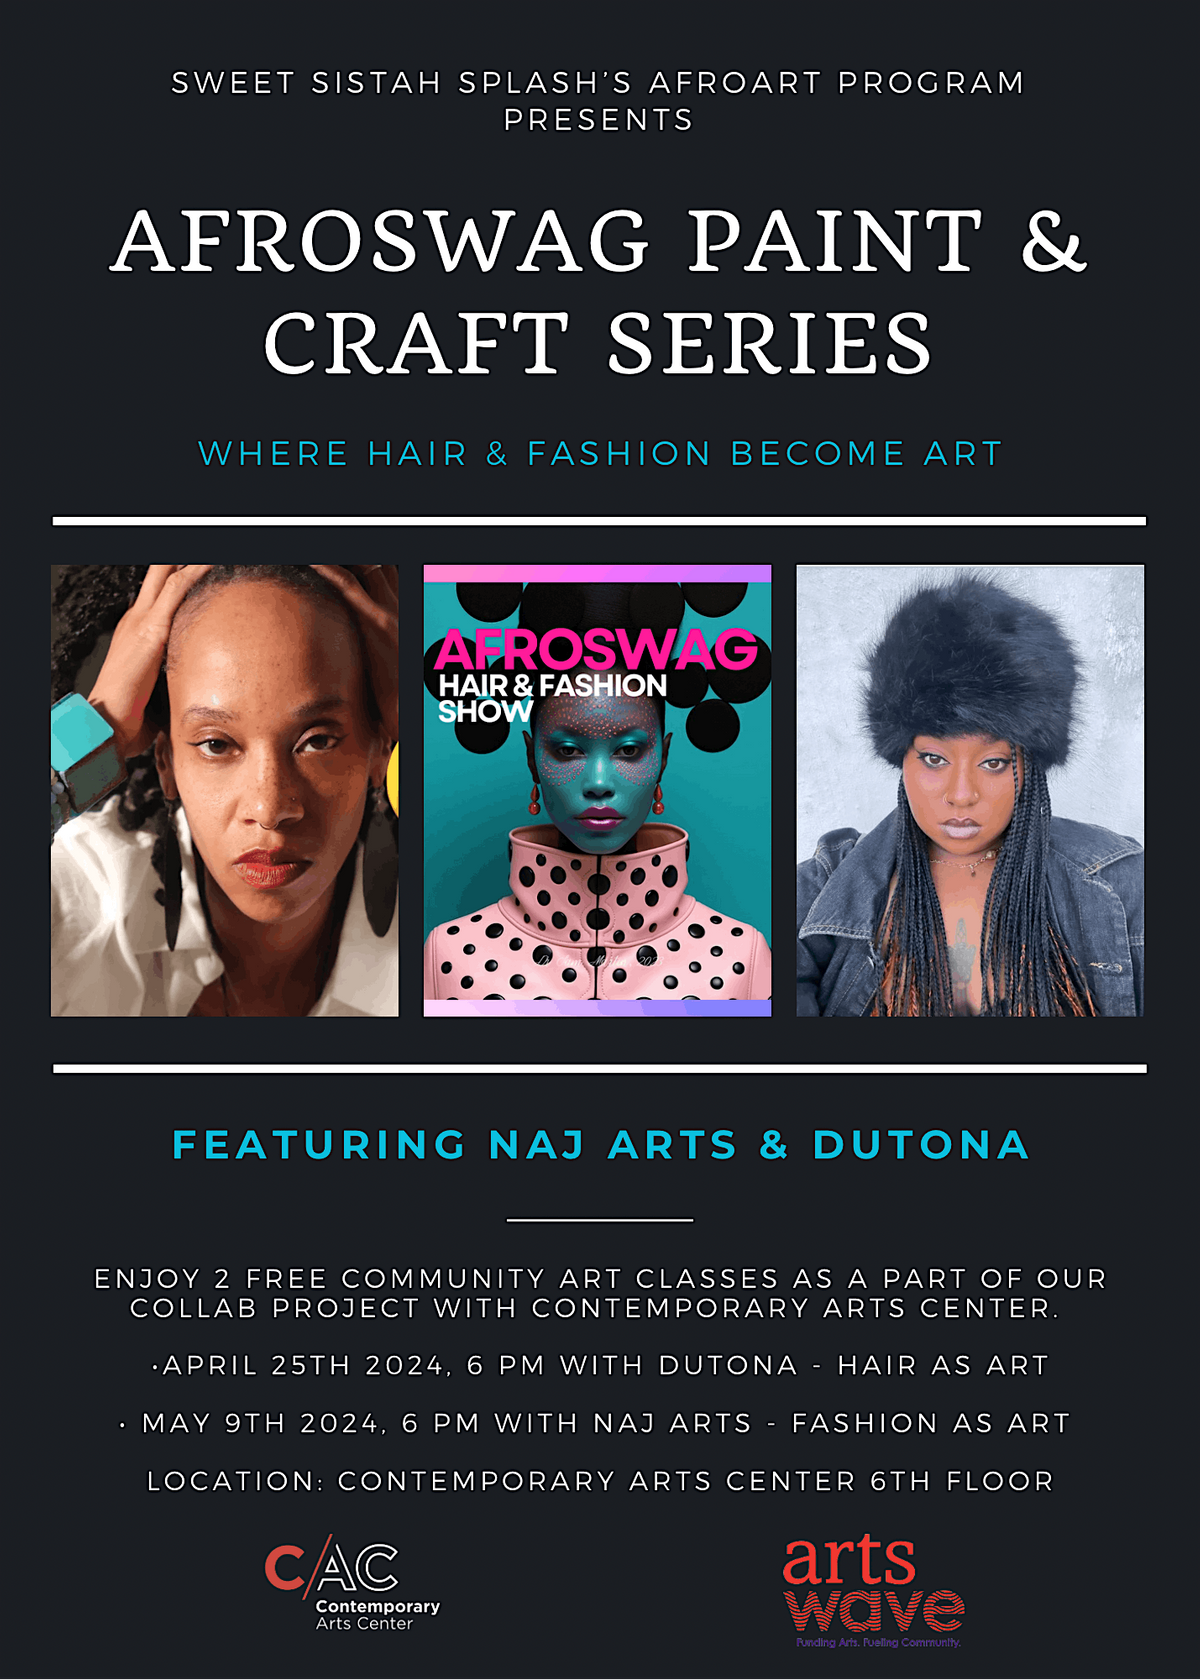 AfroSwag Paint & Craft Series - Part Two - Fashion as Art